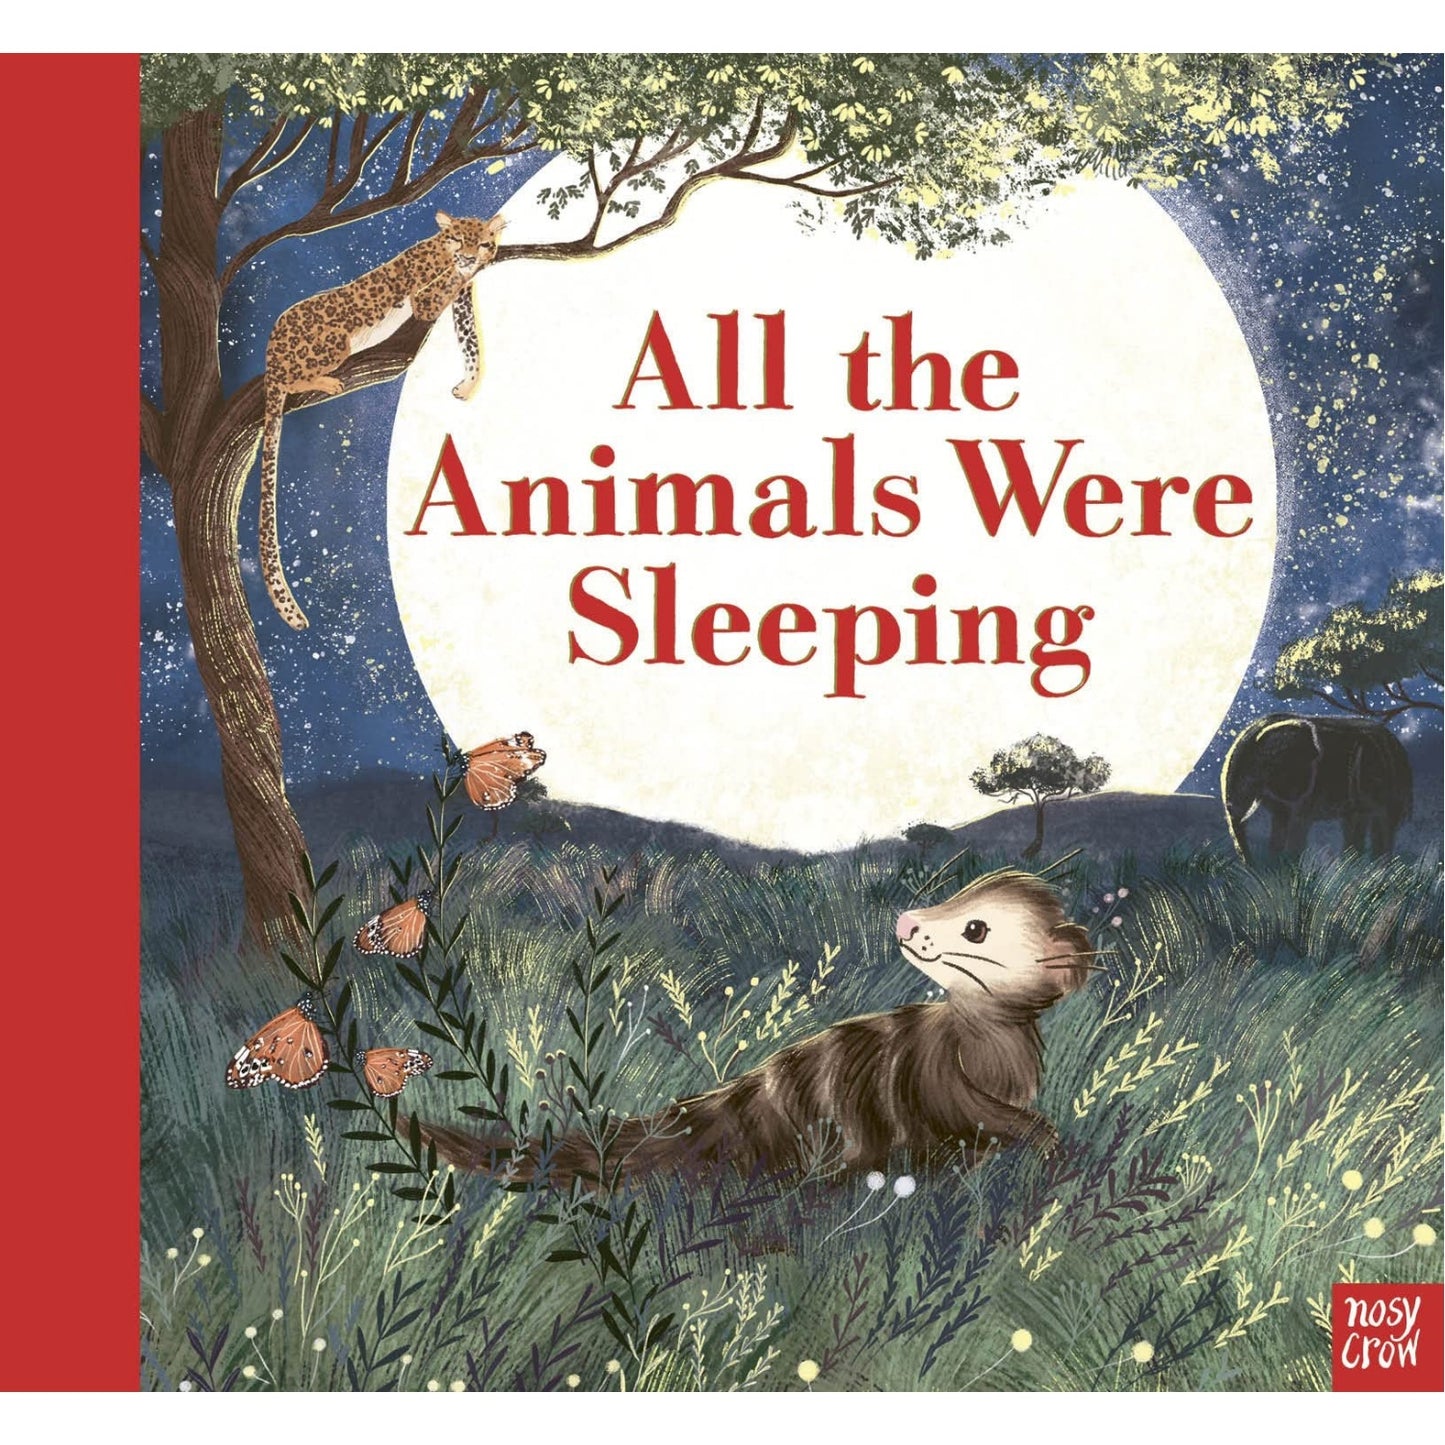 All the Animals Were Sleeping | Hardcover | Children’s Book on Nature